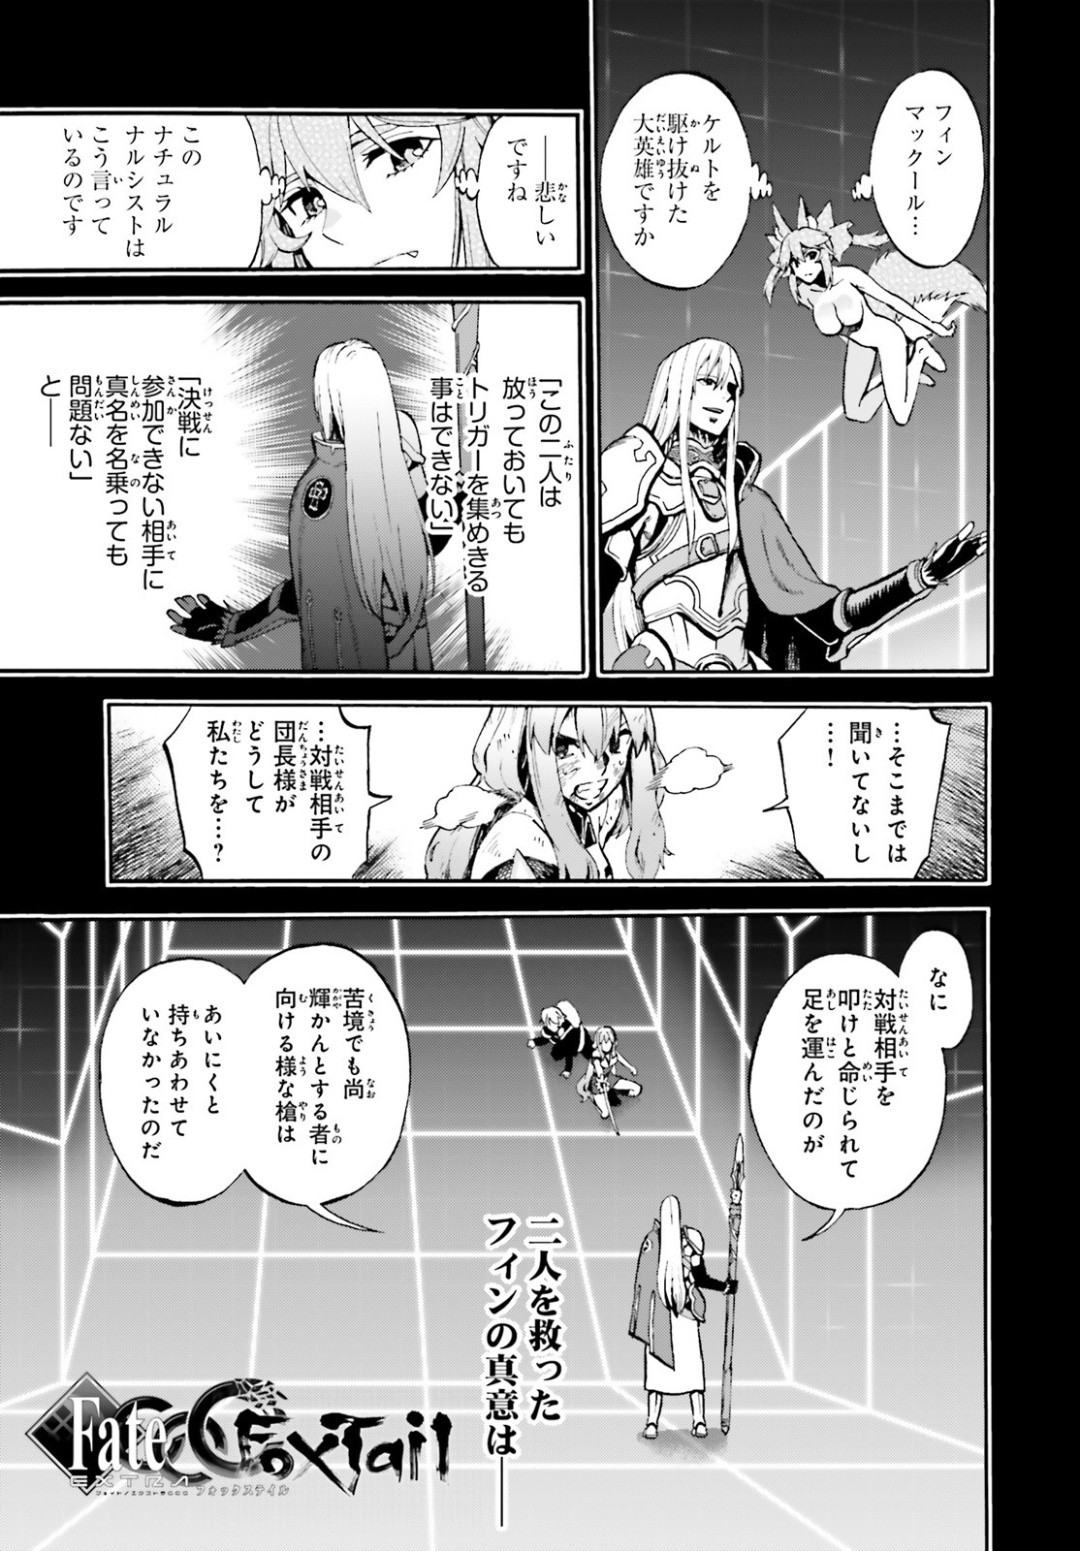 Fate Extra Ccc Fox Tail Chapter 58 Page 1 Raw Manga 生漫画